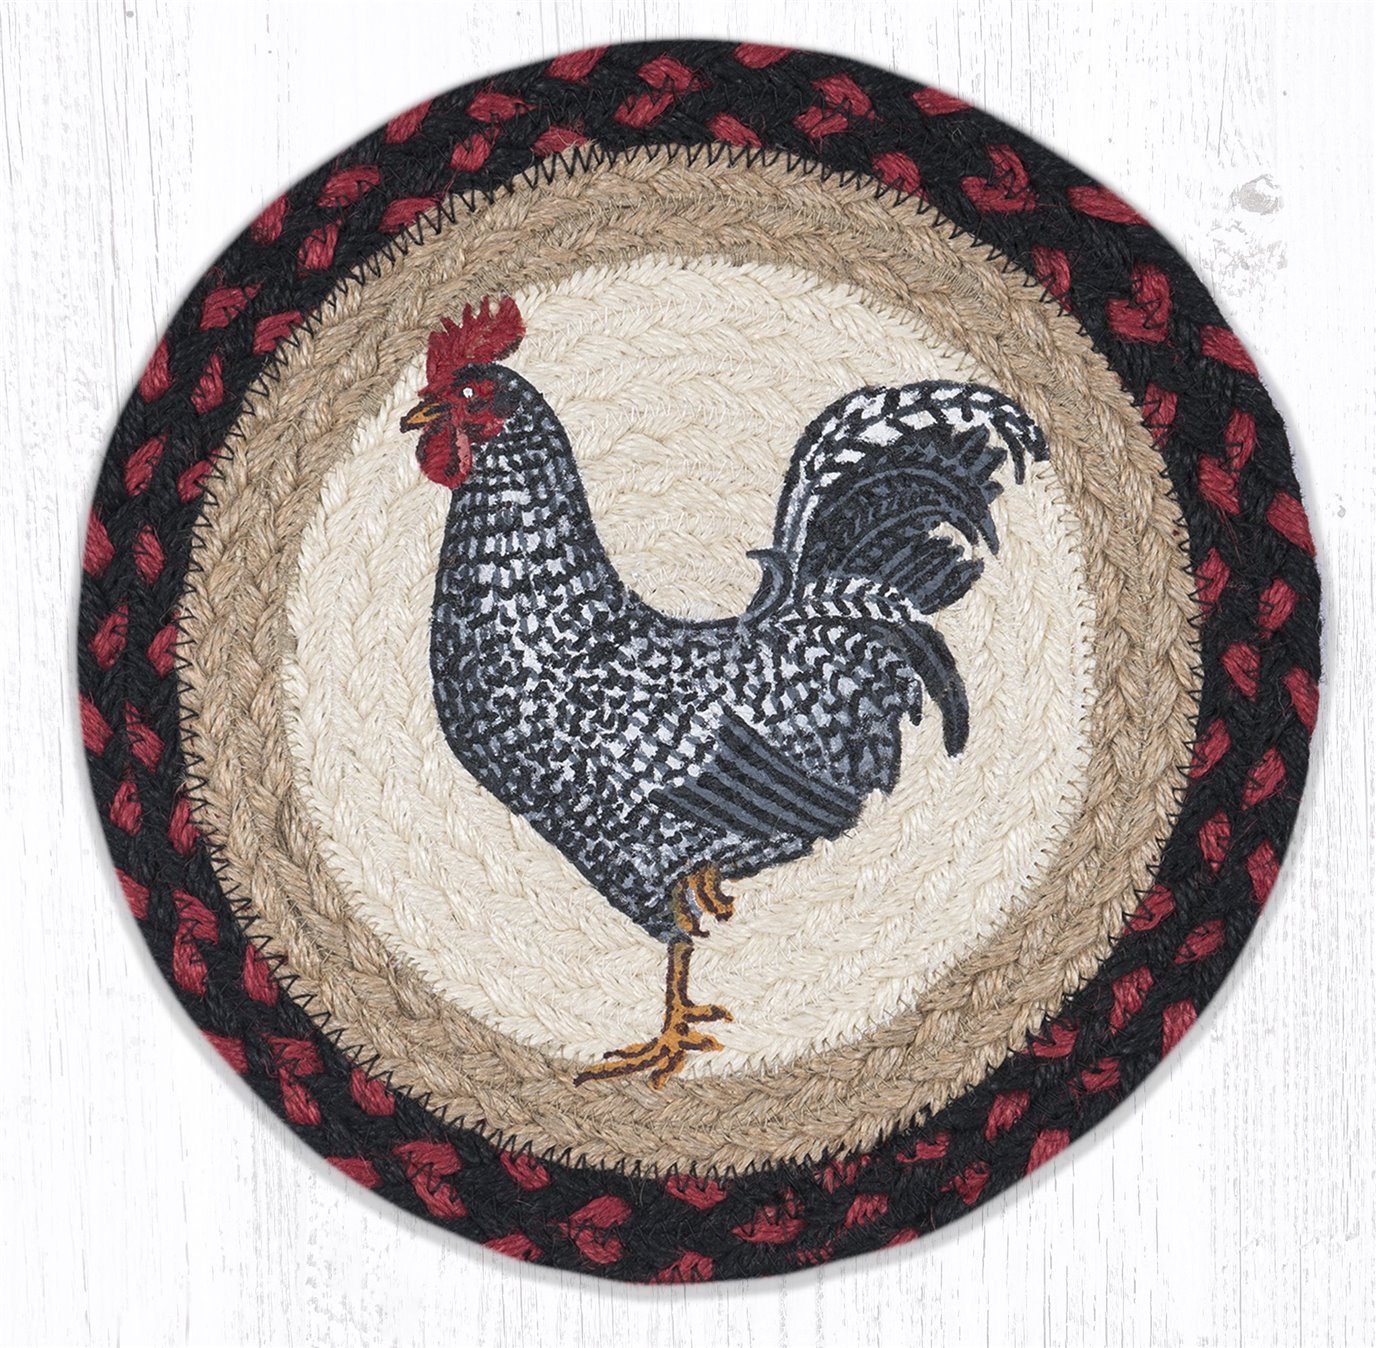 Black & White Rooster Printed Round Braided Trivet 10"x10"